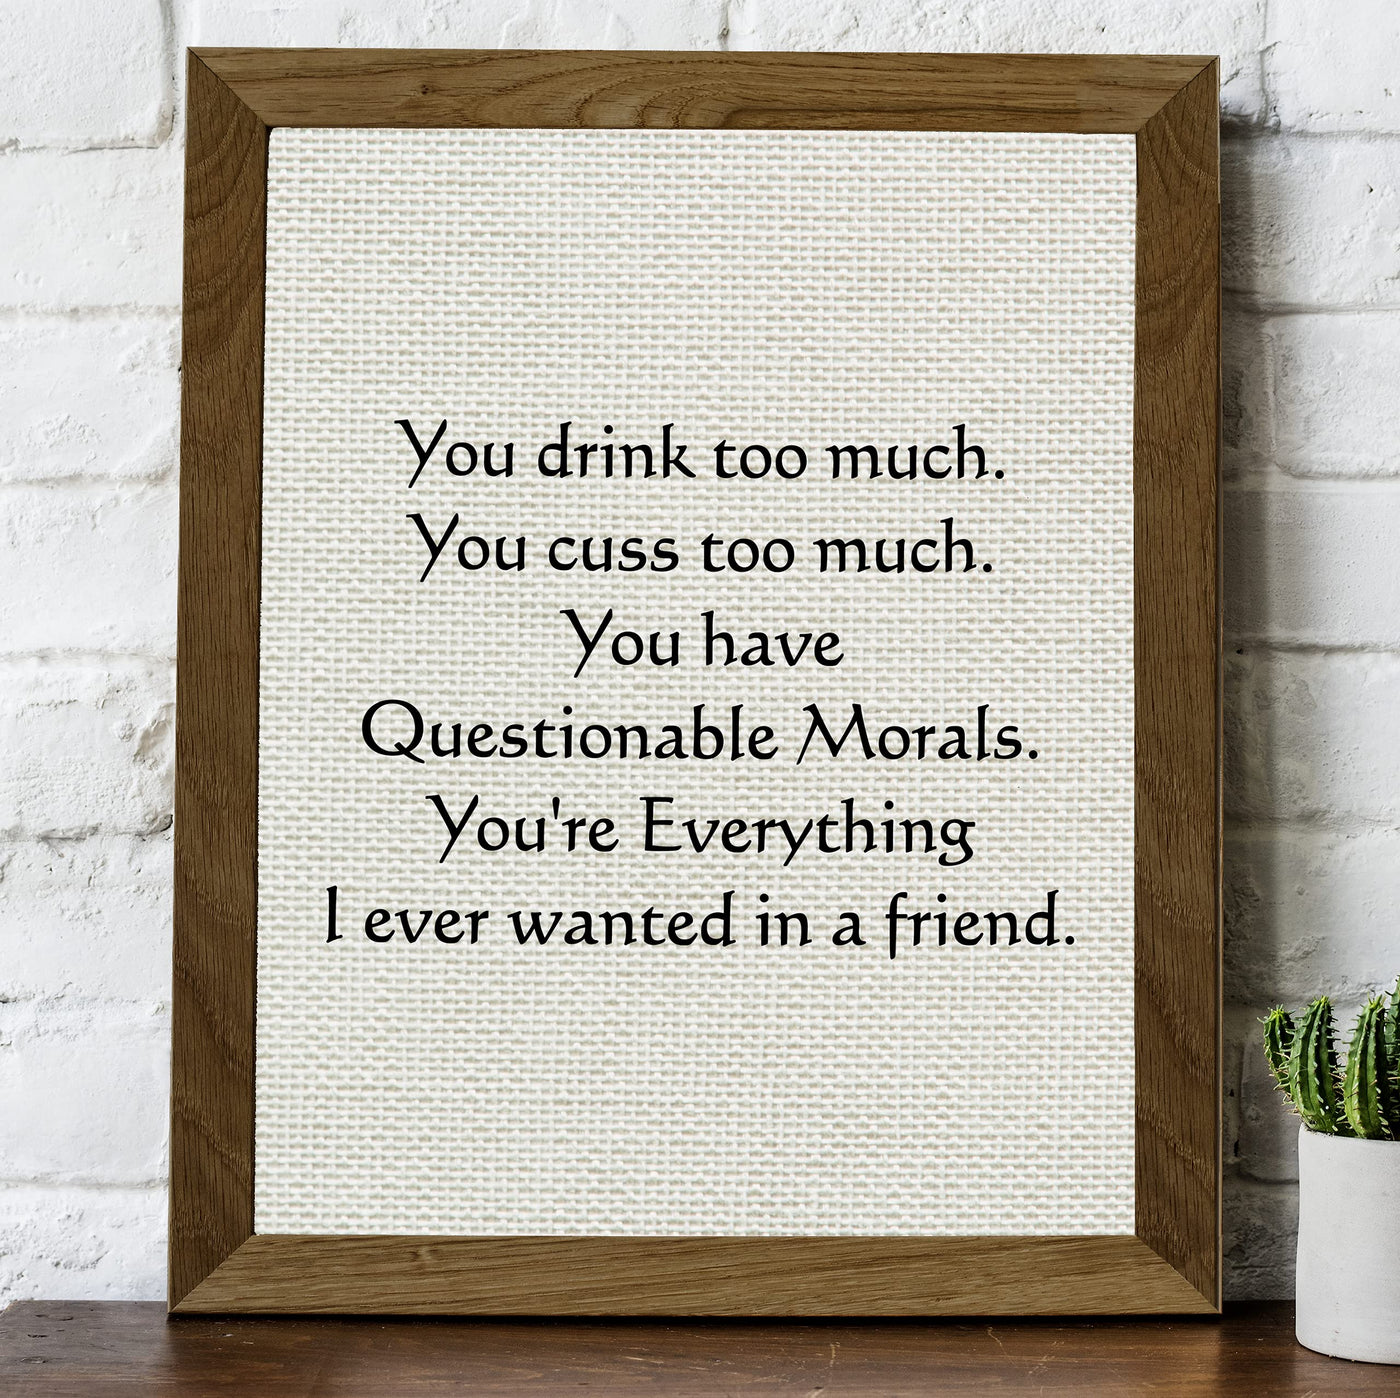 You Drink-Cuss Too Much-Everything I Ever Wanted Funny Beer Sign -8 x 10" Sarcastic Friendship Wall Art Print-Ready to Frame. Humorous Home-Cave-Bar-Garage-Shop Decor. Fun Gift for Crazy Friends!